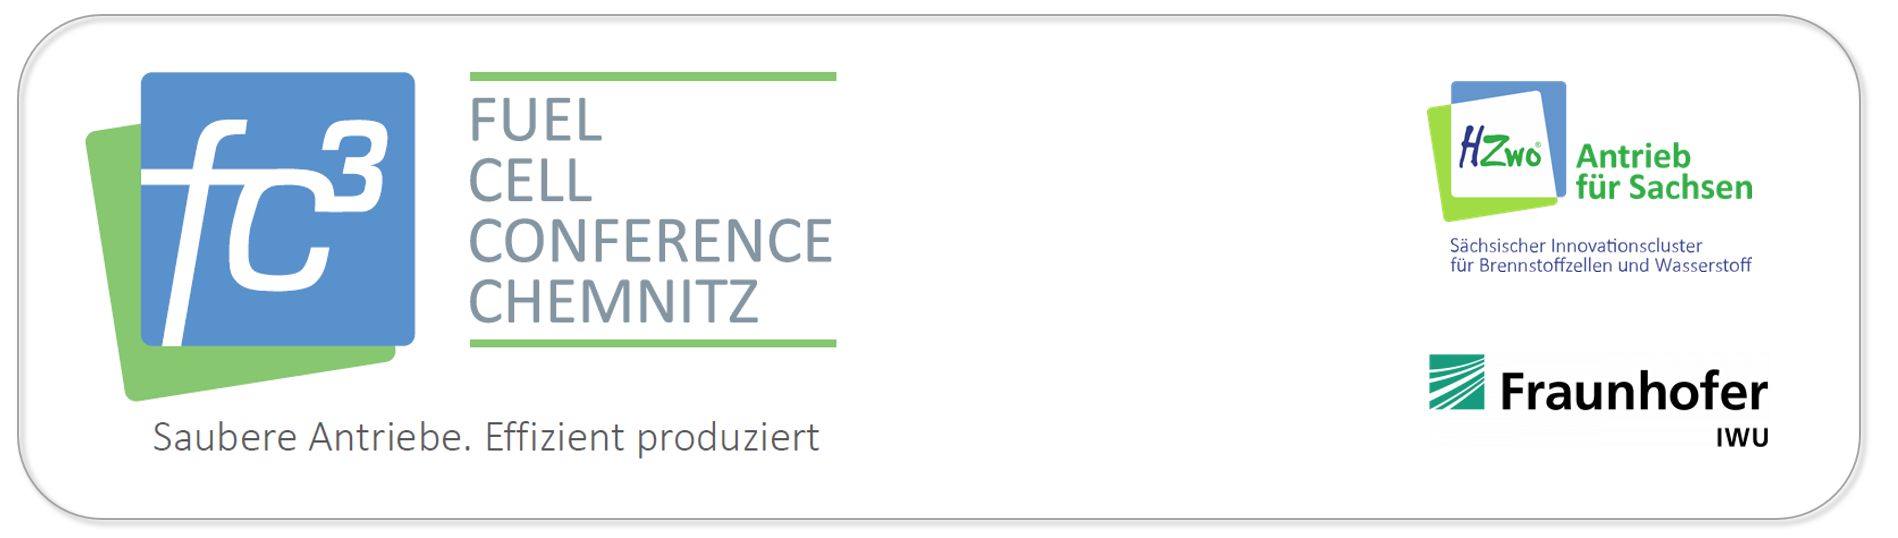 FC³ Fuel Cell Conference Chemnitz